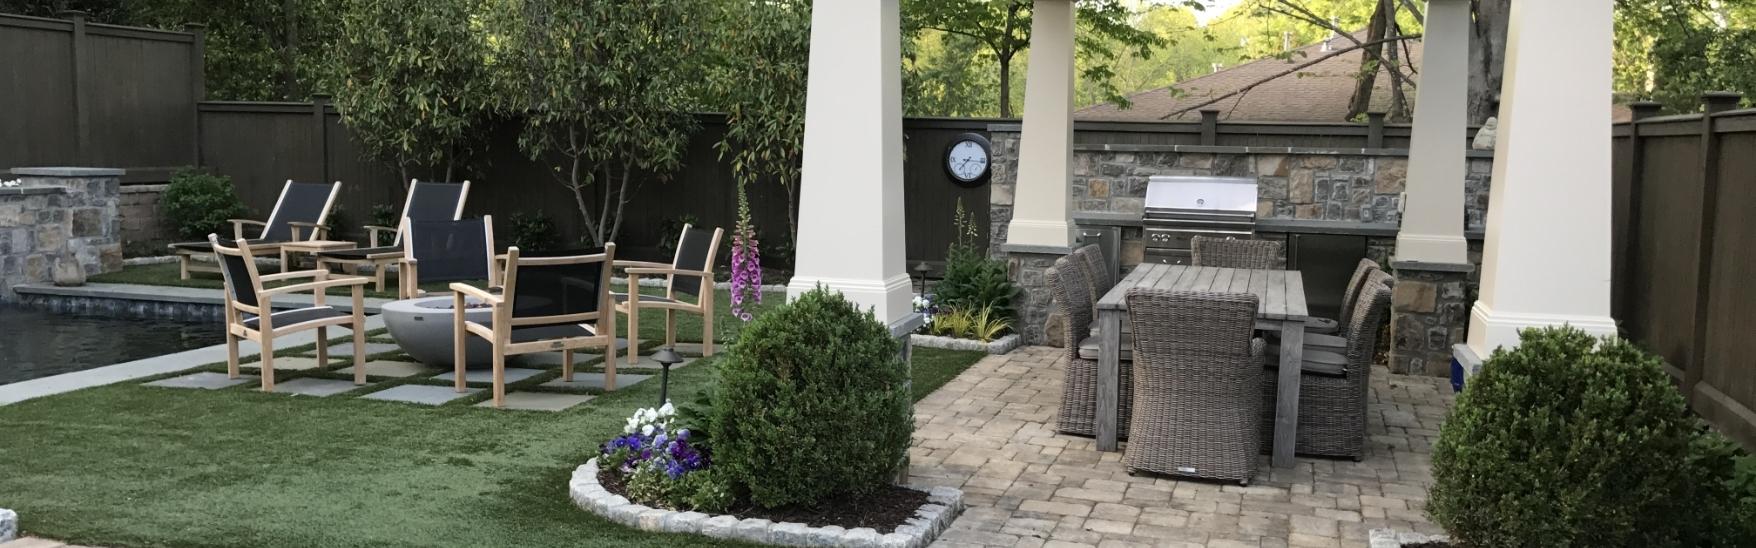 Outdoor Inspiration: Small Backyard Patio with BIG Style